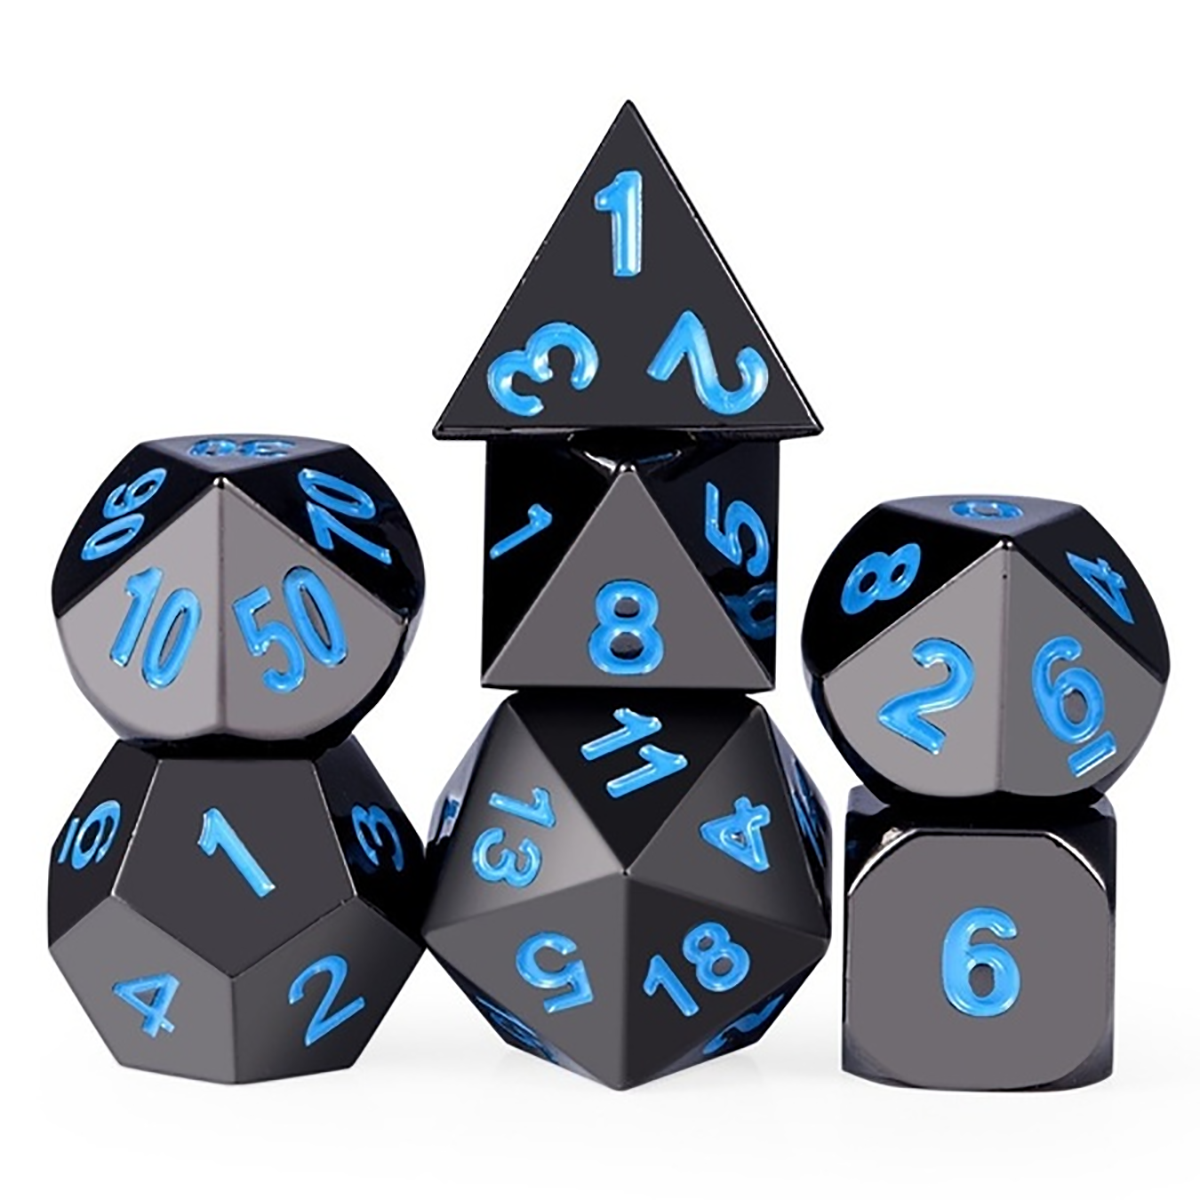 7-PcsSet-Metal-Dice-Set-Role-Playing-Dragons-Table-Game-With-Cloth-Bag-Bar-Party-Game-Dice-1677684-7